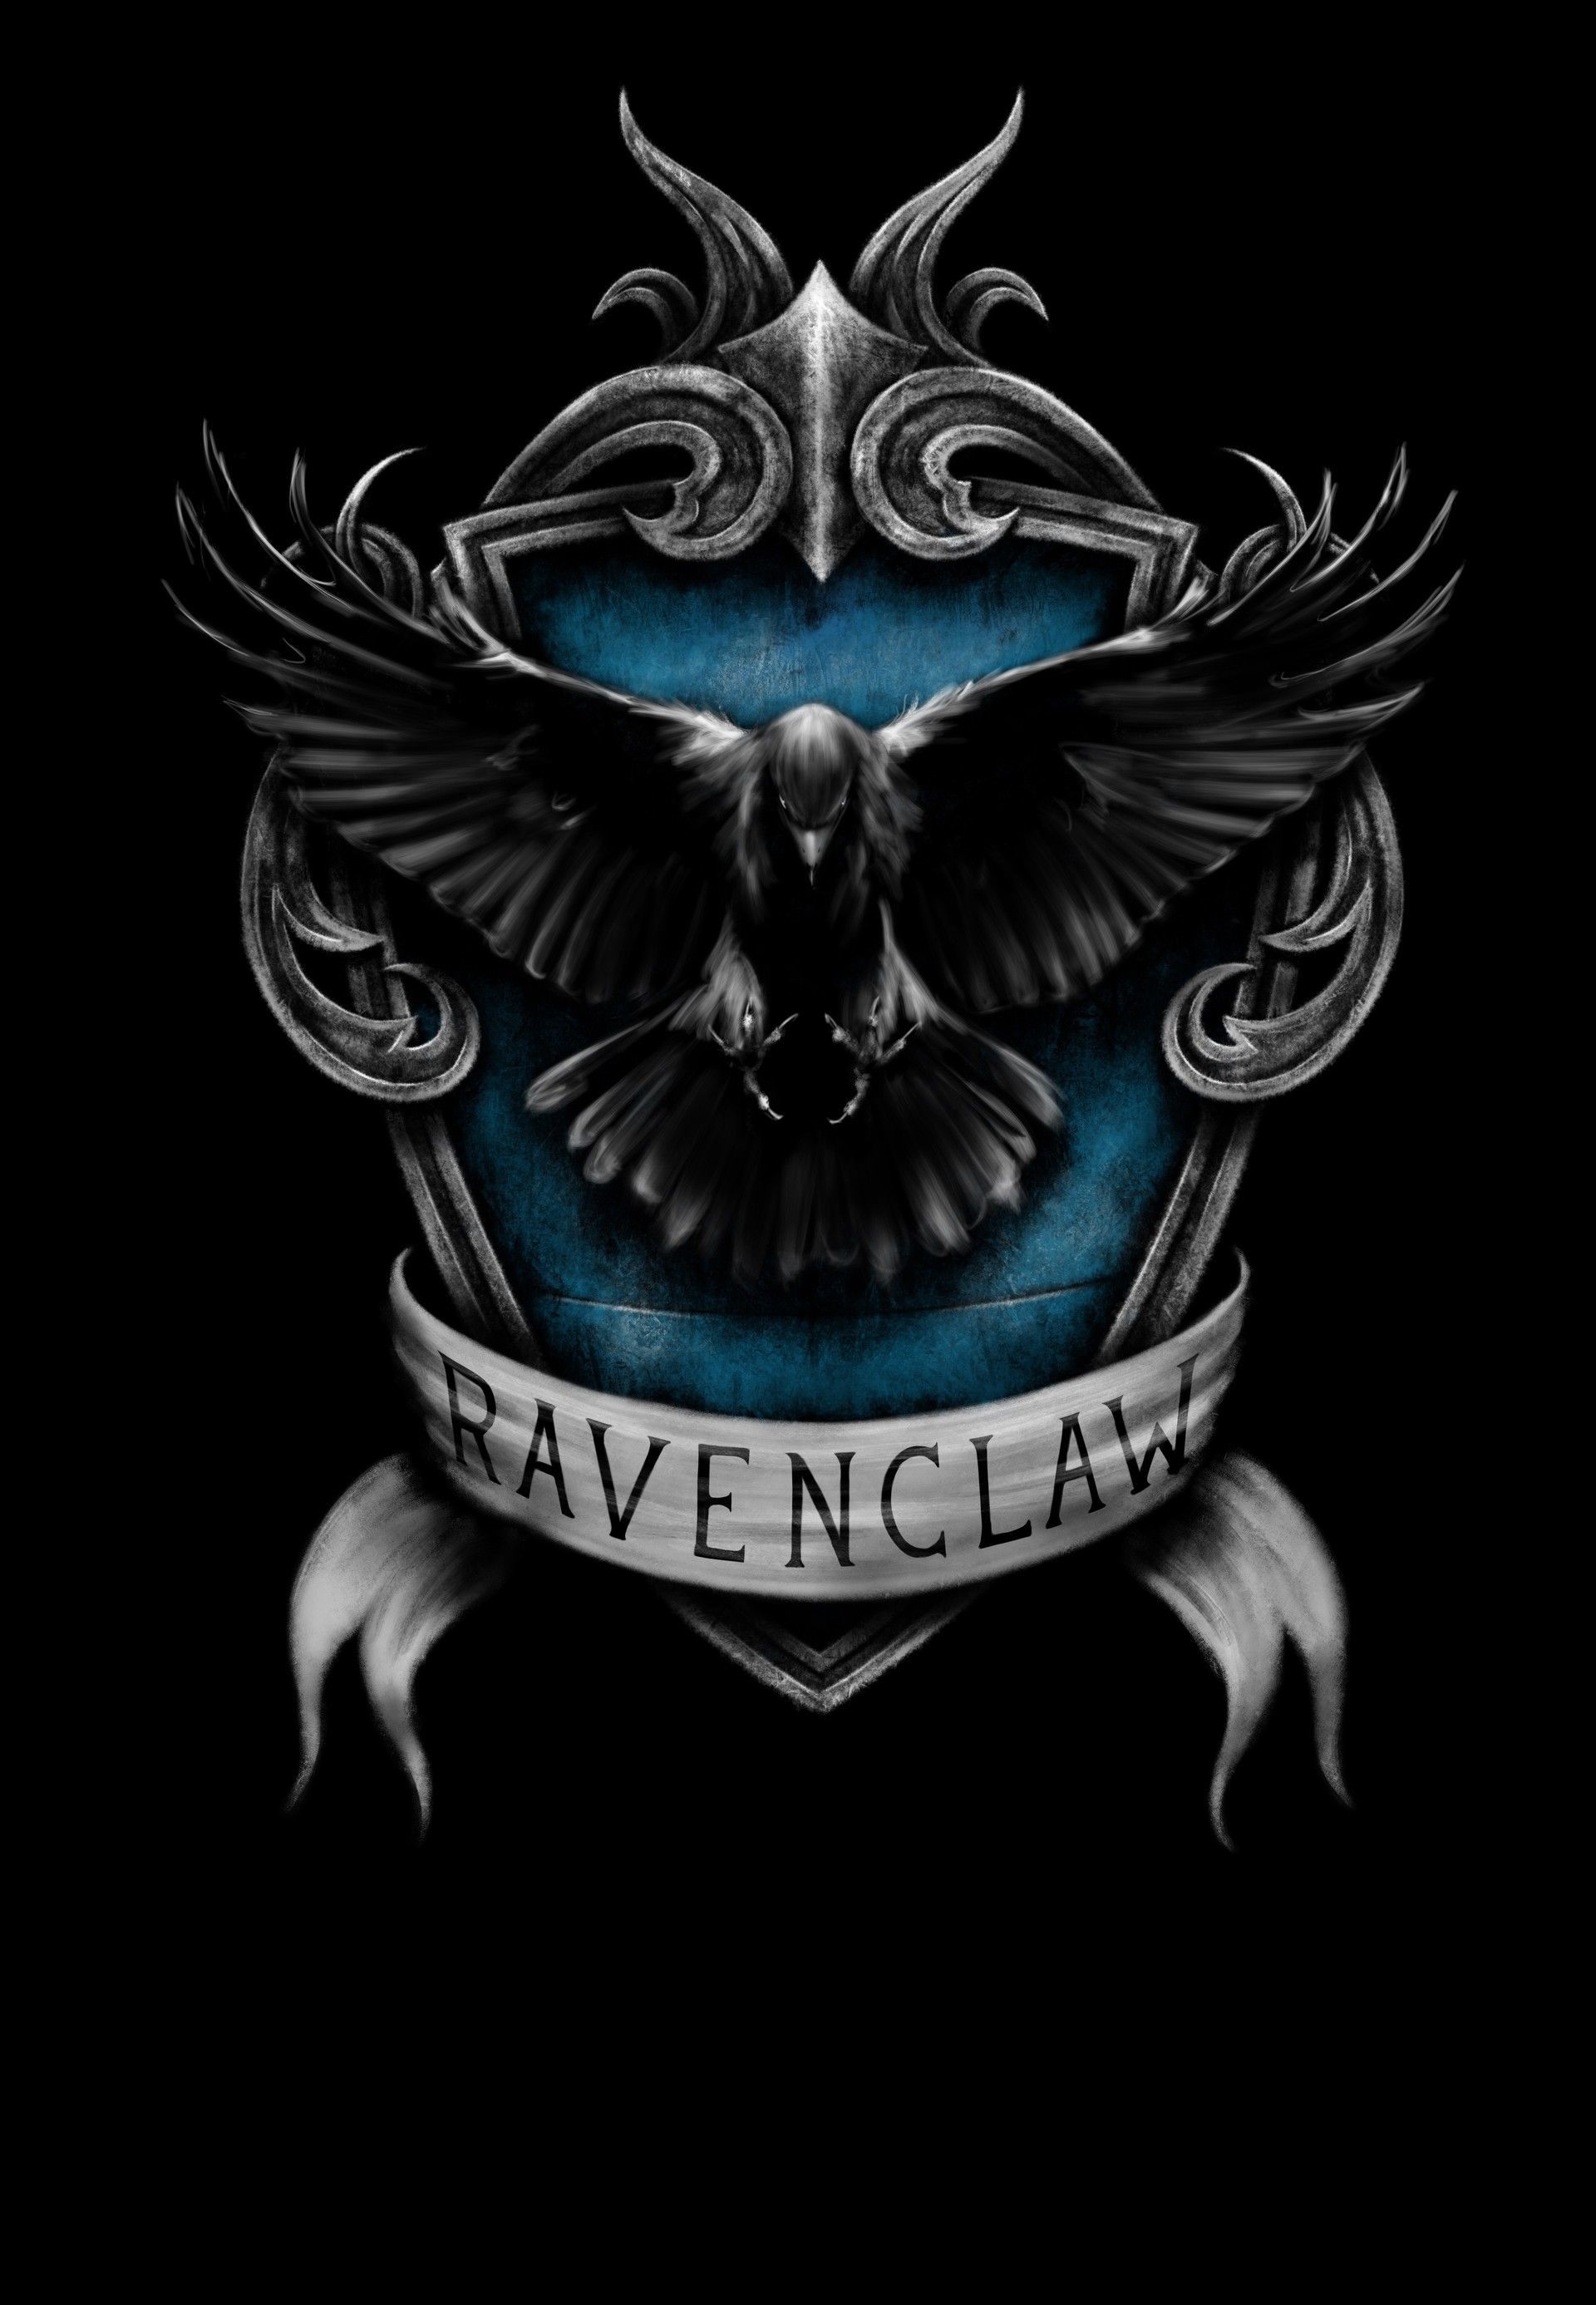 Ravenclaw iphone wallpaper  Harry potter ravenclaw Ravenclaw Harry  potter wallpaper